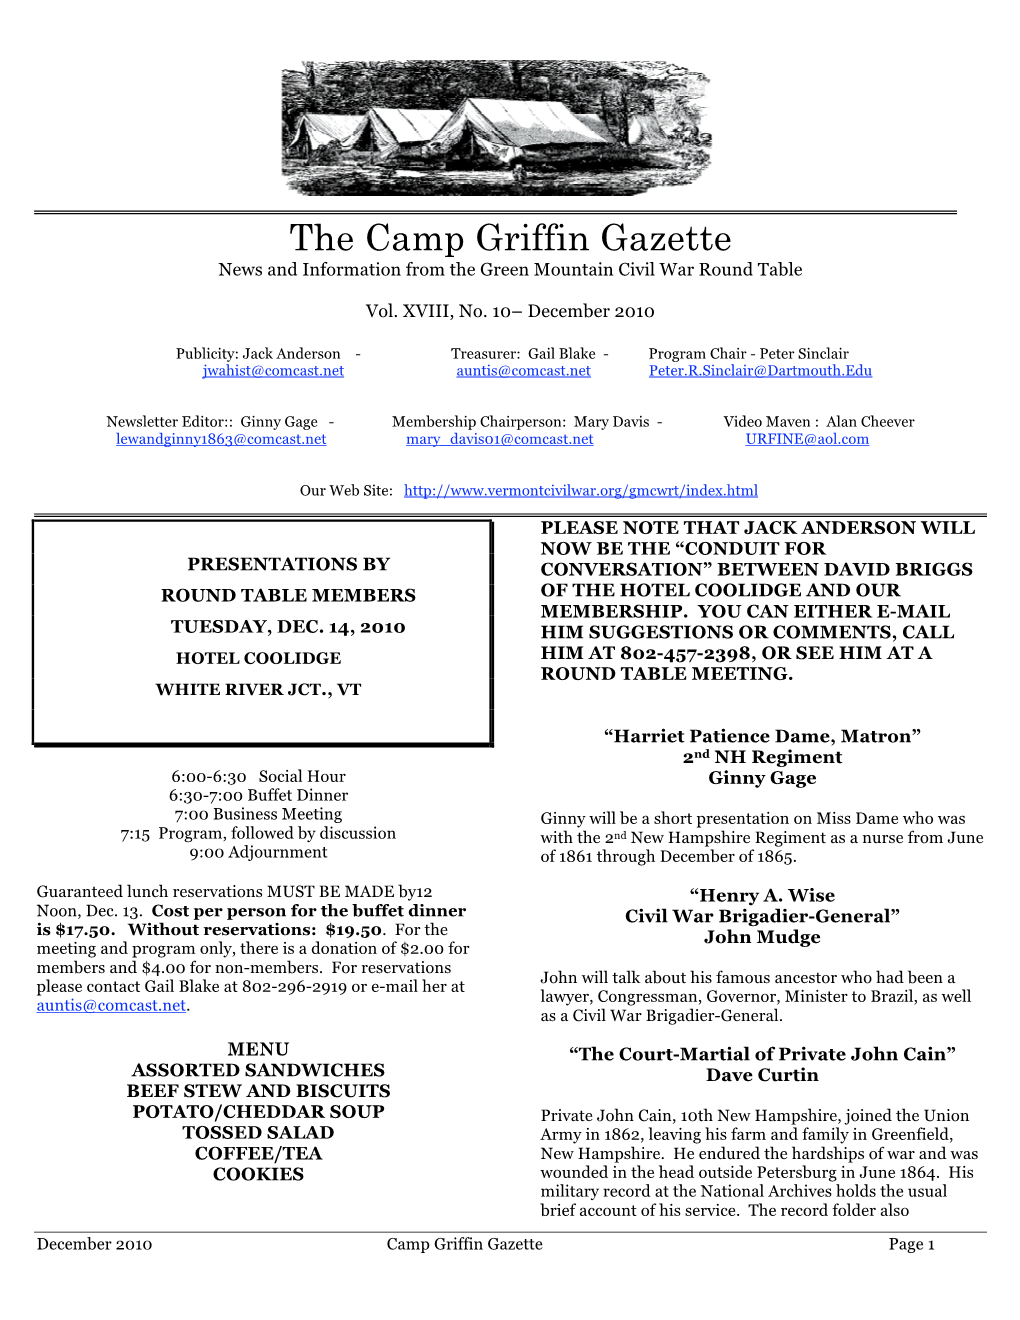 Camp Griffin Gazette News and Information from the Green Mountain Civil War Round Table